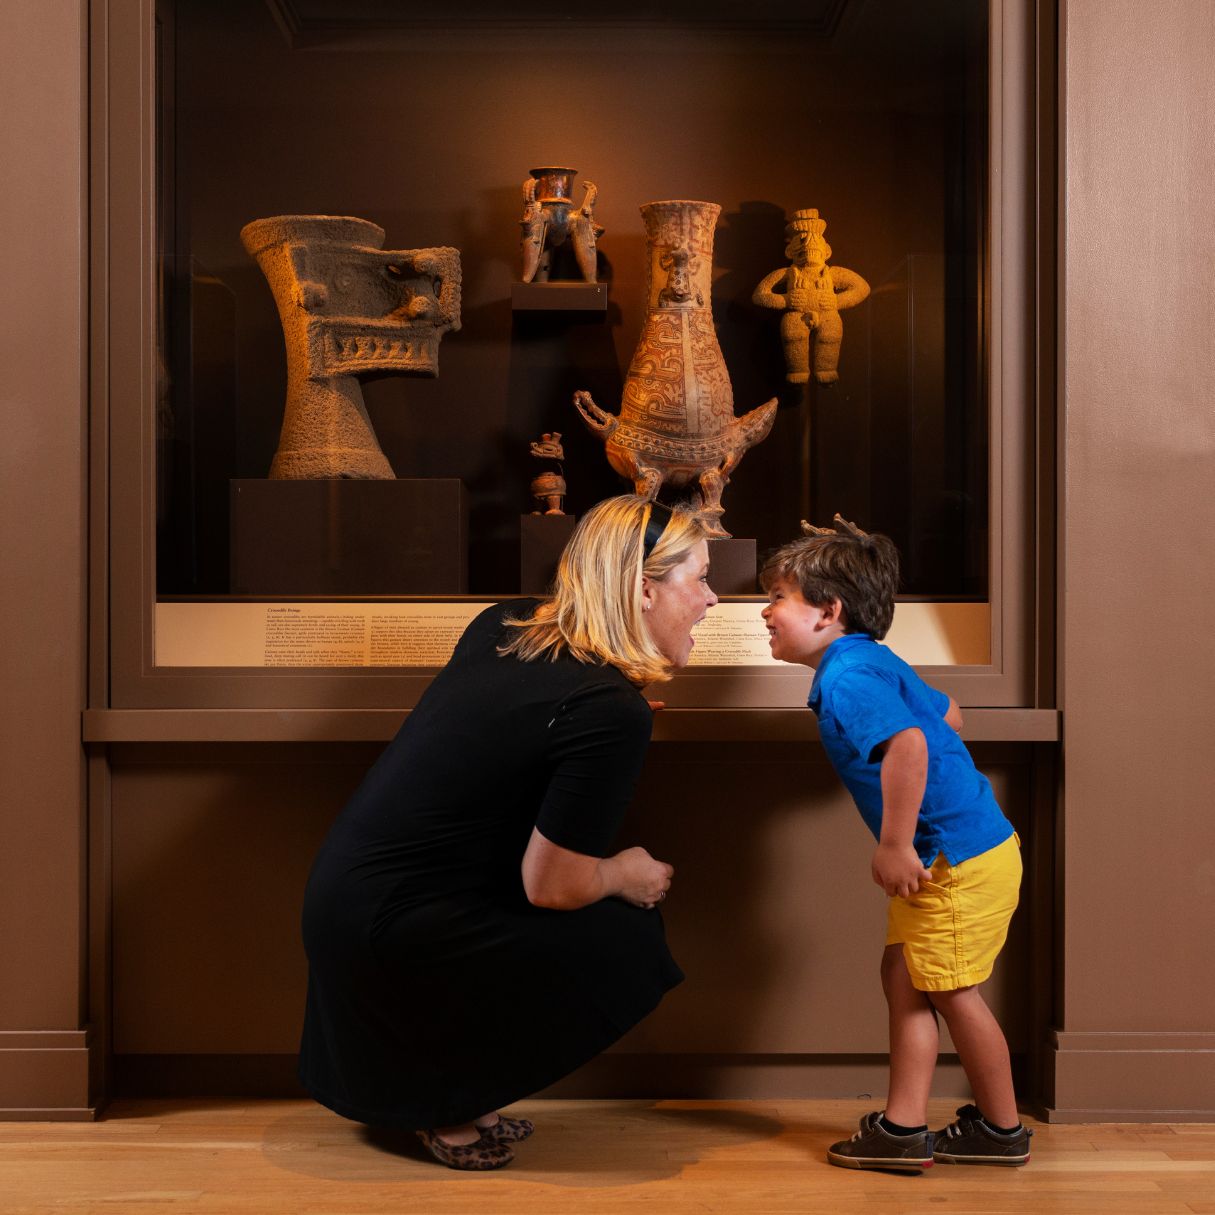 Adult and child looking at each other and smiling in the galleries in front of sculptures